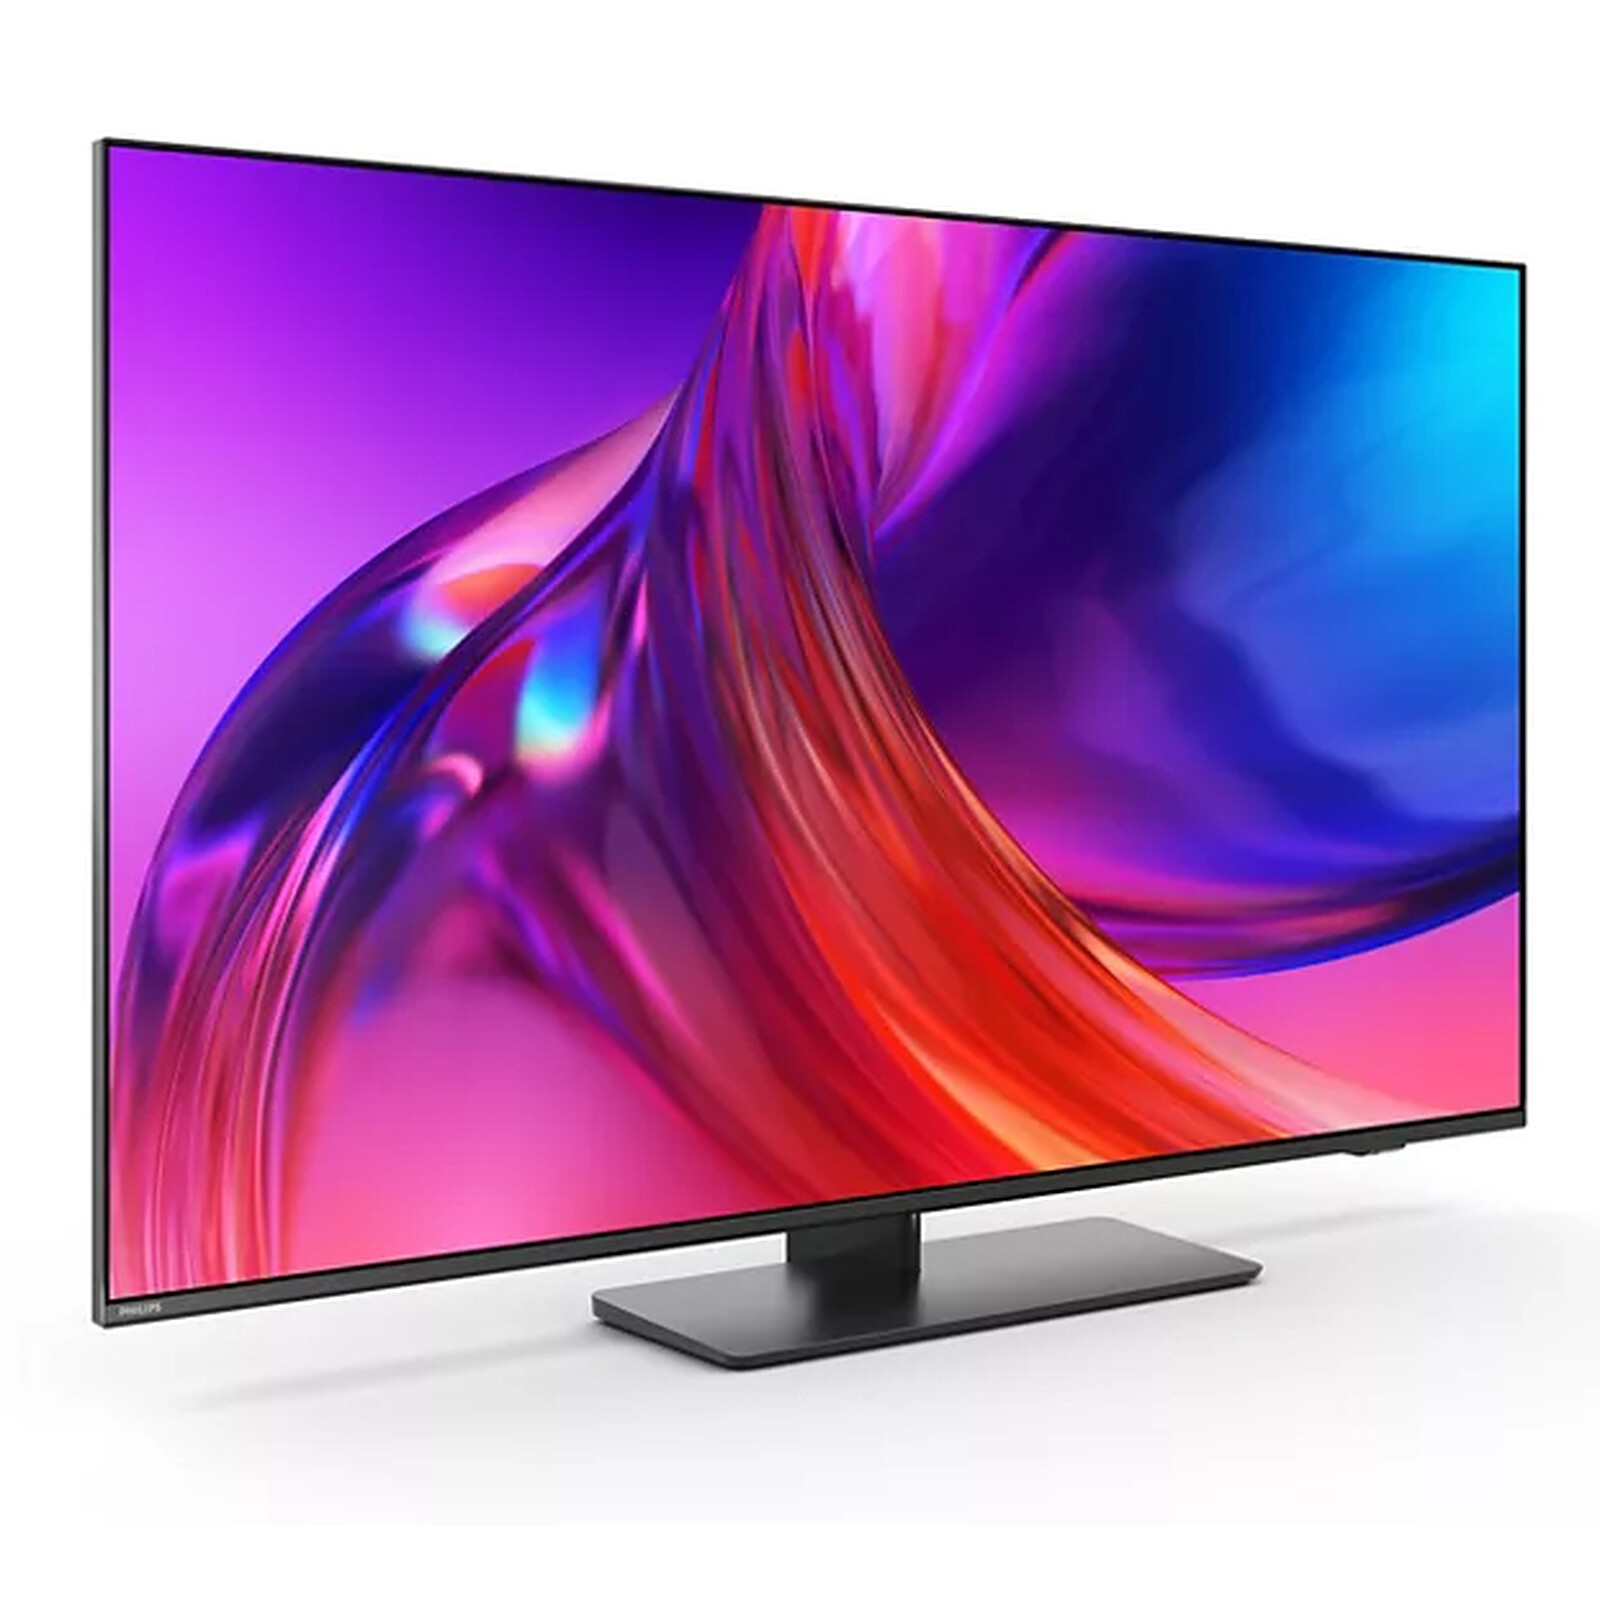 - The One TV - Philips 3-year LDLC 50PUS8808/12 warranty